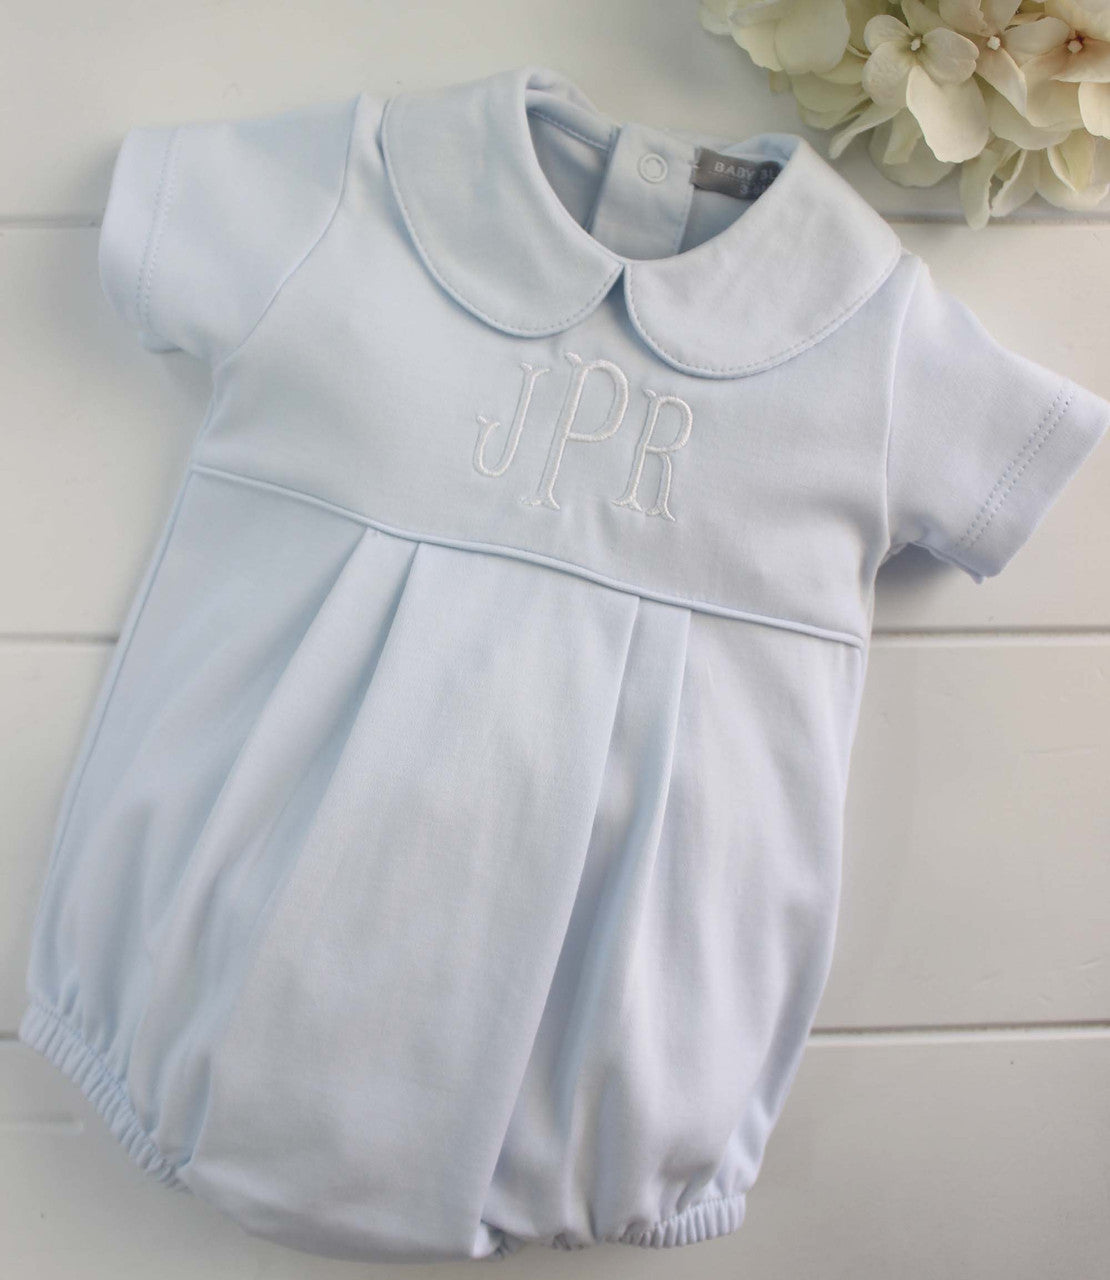 Baby Boys Blue Cotton Bubble Outfit Peter Pan Collar